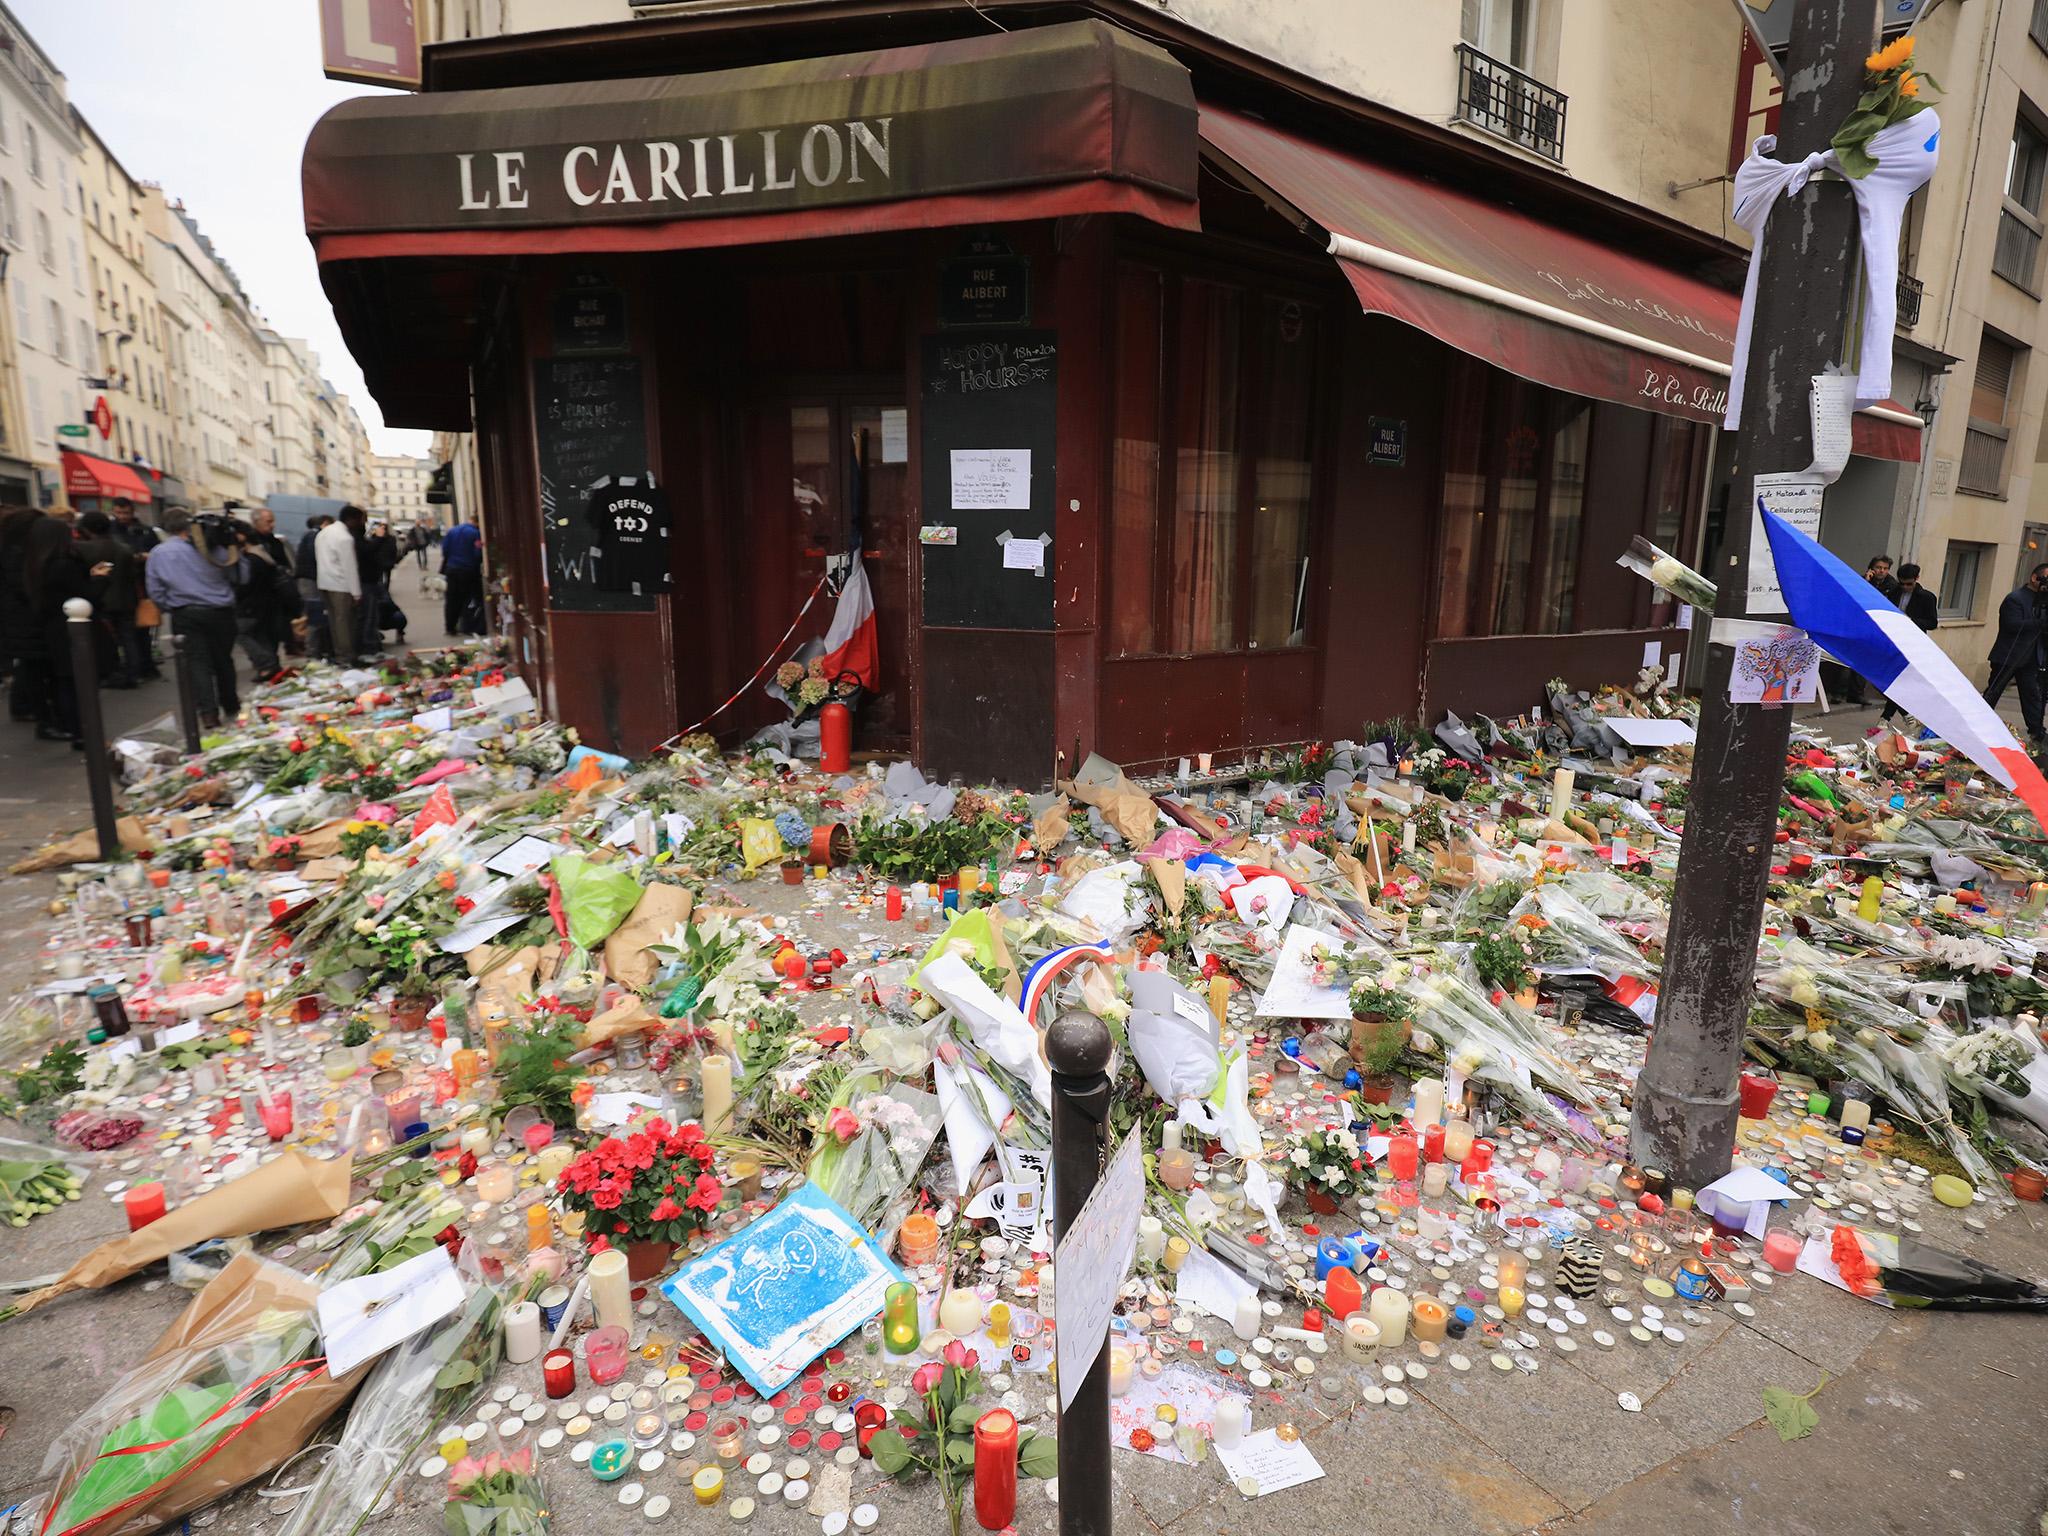 Le Carillon restaurant, one of the scenes of the Paris Attacks in November last year